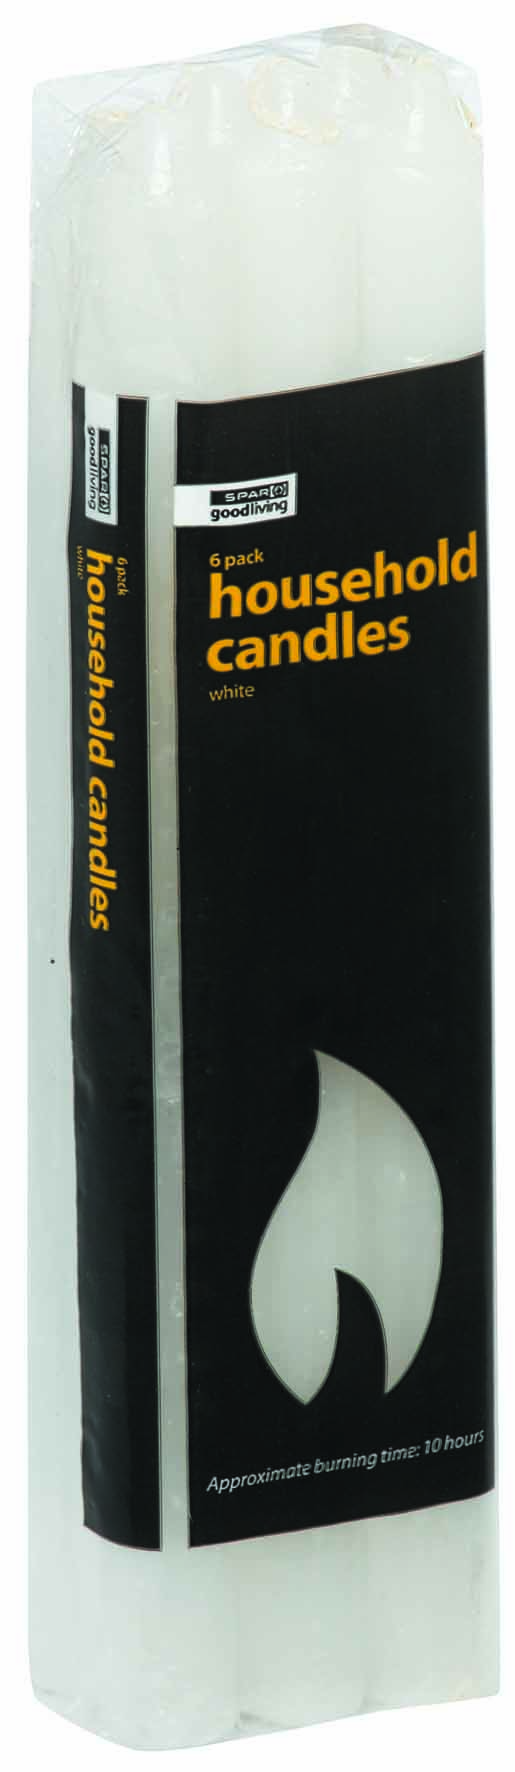 household candles - white (6 piece)